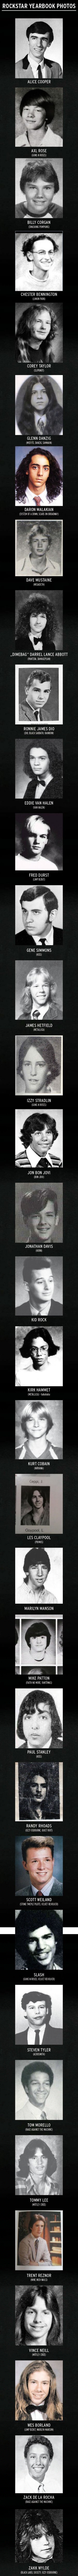 Rockstars High School Yearbook Pictures Before They Were Famous.